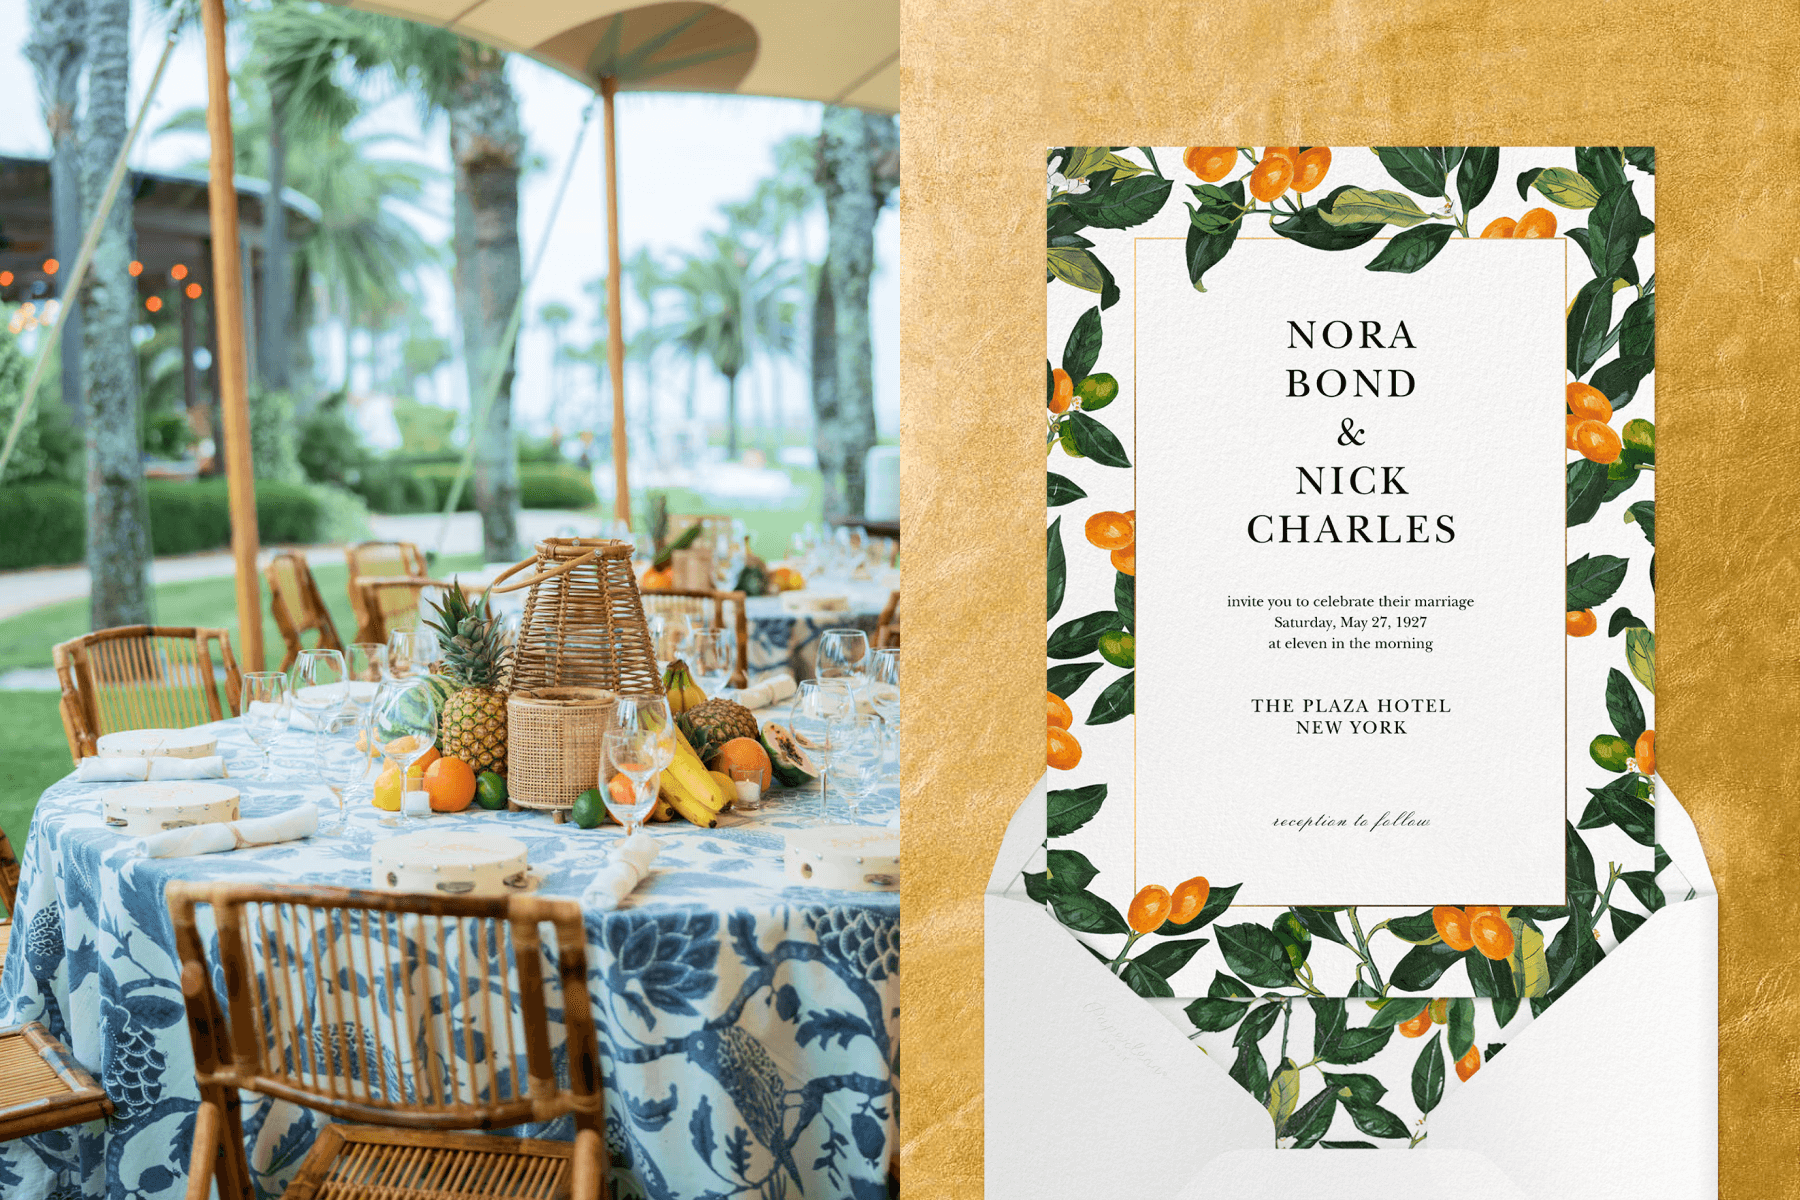 Left: In a tropical setting, a round table with a blue printed table cloth and rattan chairs is set with a rattan lantern and tropical fruits in the center. Right: A wedding invitation with a border of leaves and kumquats on a gold foil backdrop.